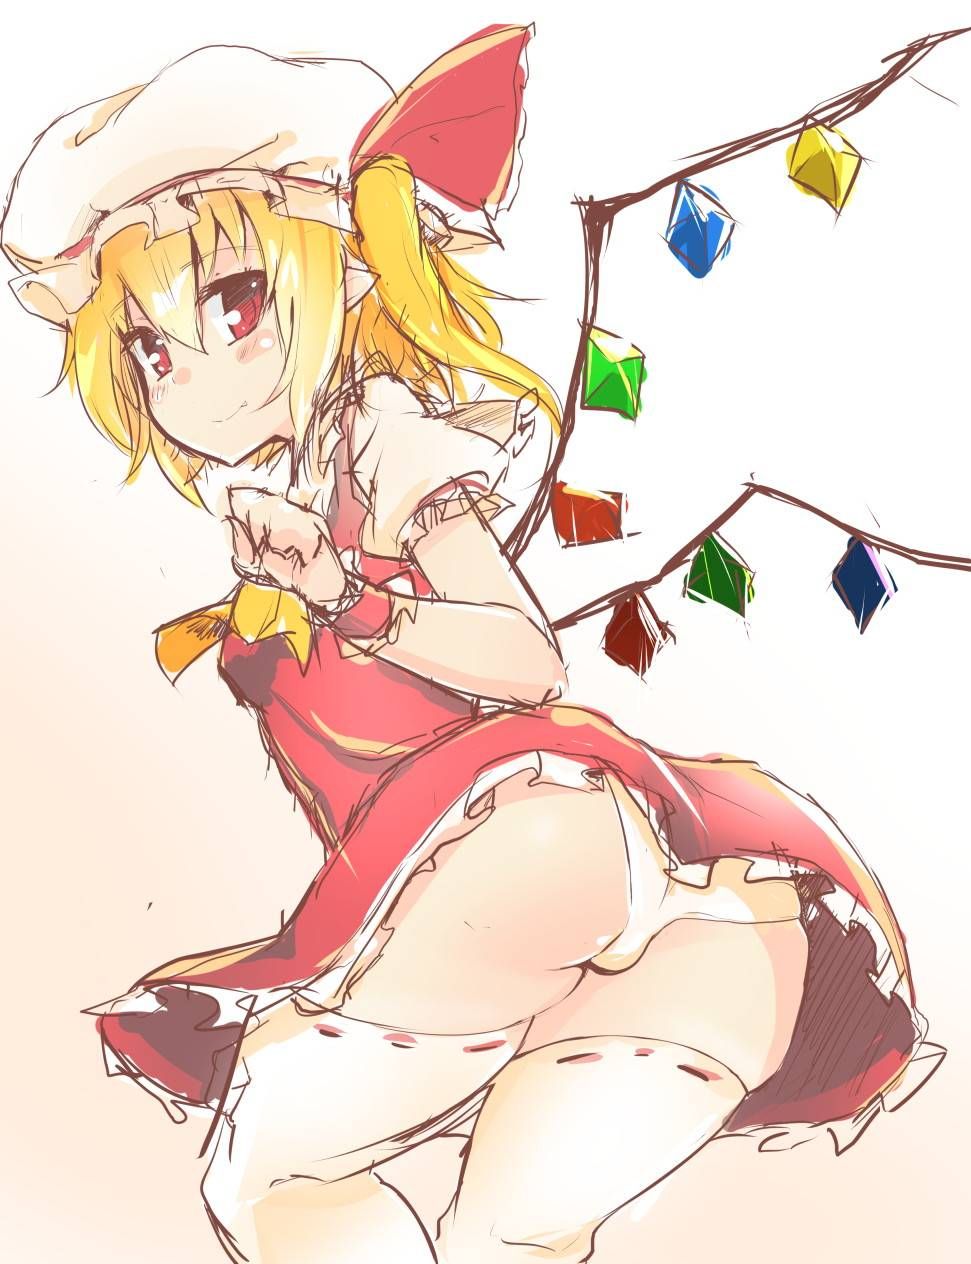 People who want to see erotic images of the Touhou Project gather! 5